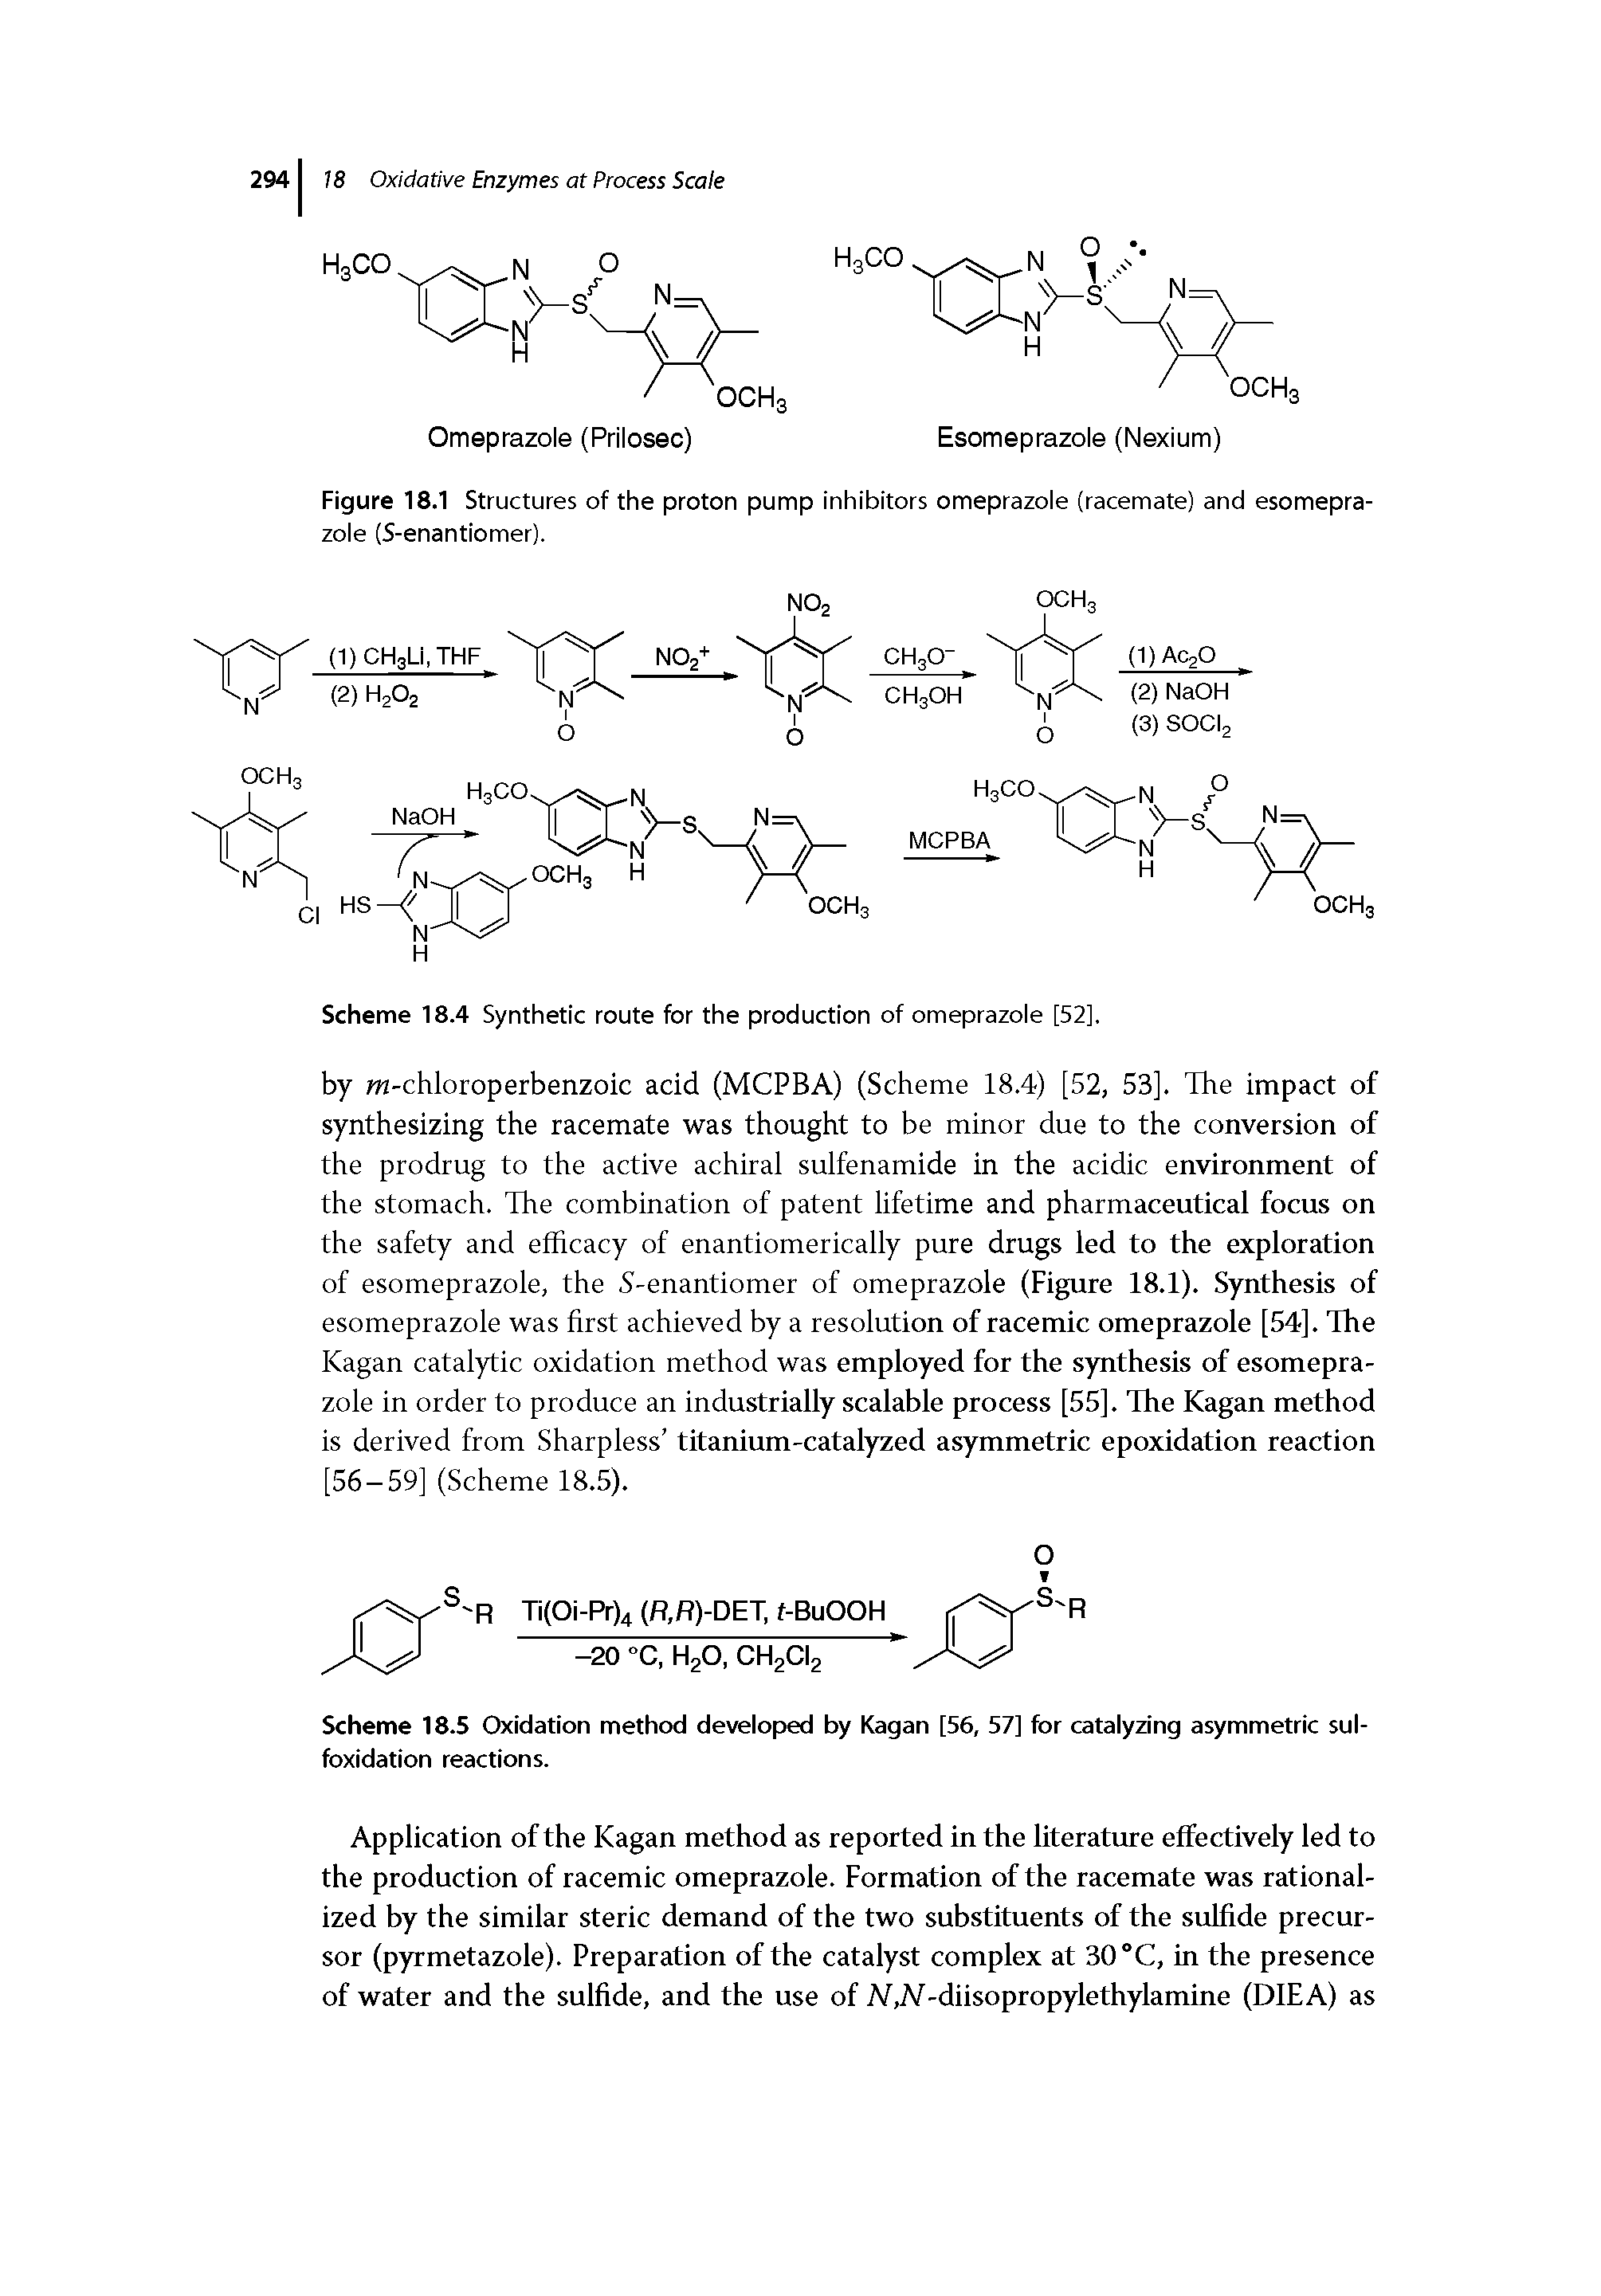 Scheme 18.5 Oxidation method developed by Kagan [56, 57] for catalyzing asymmetric sulfoxidation reactions.